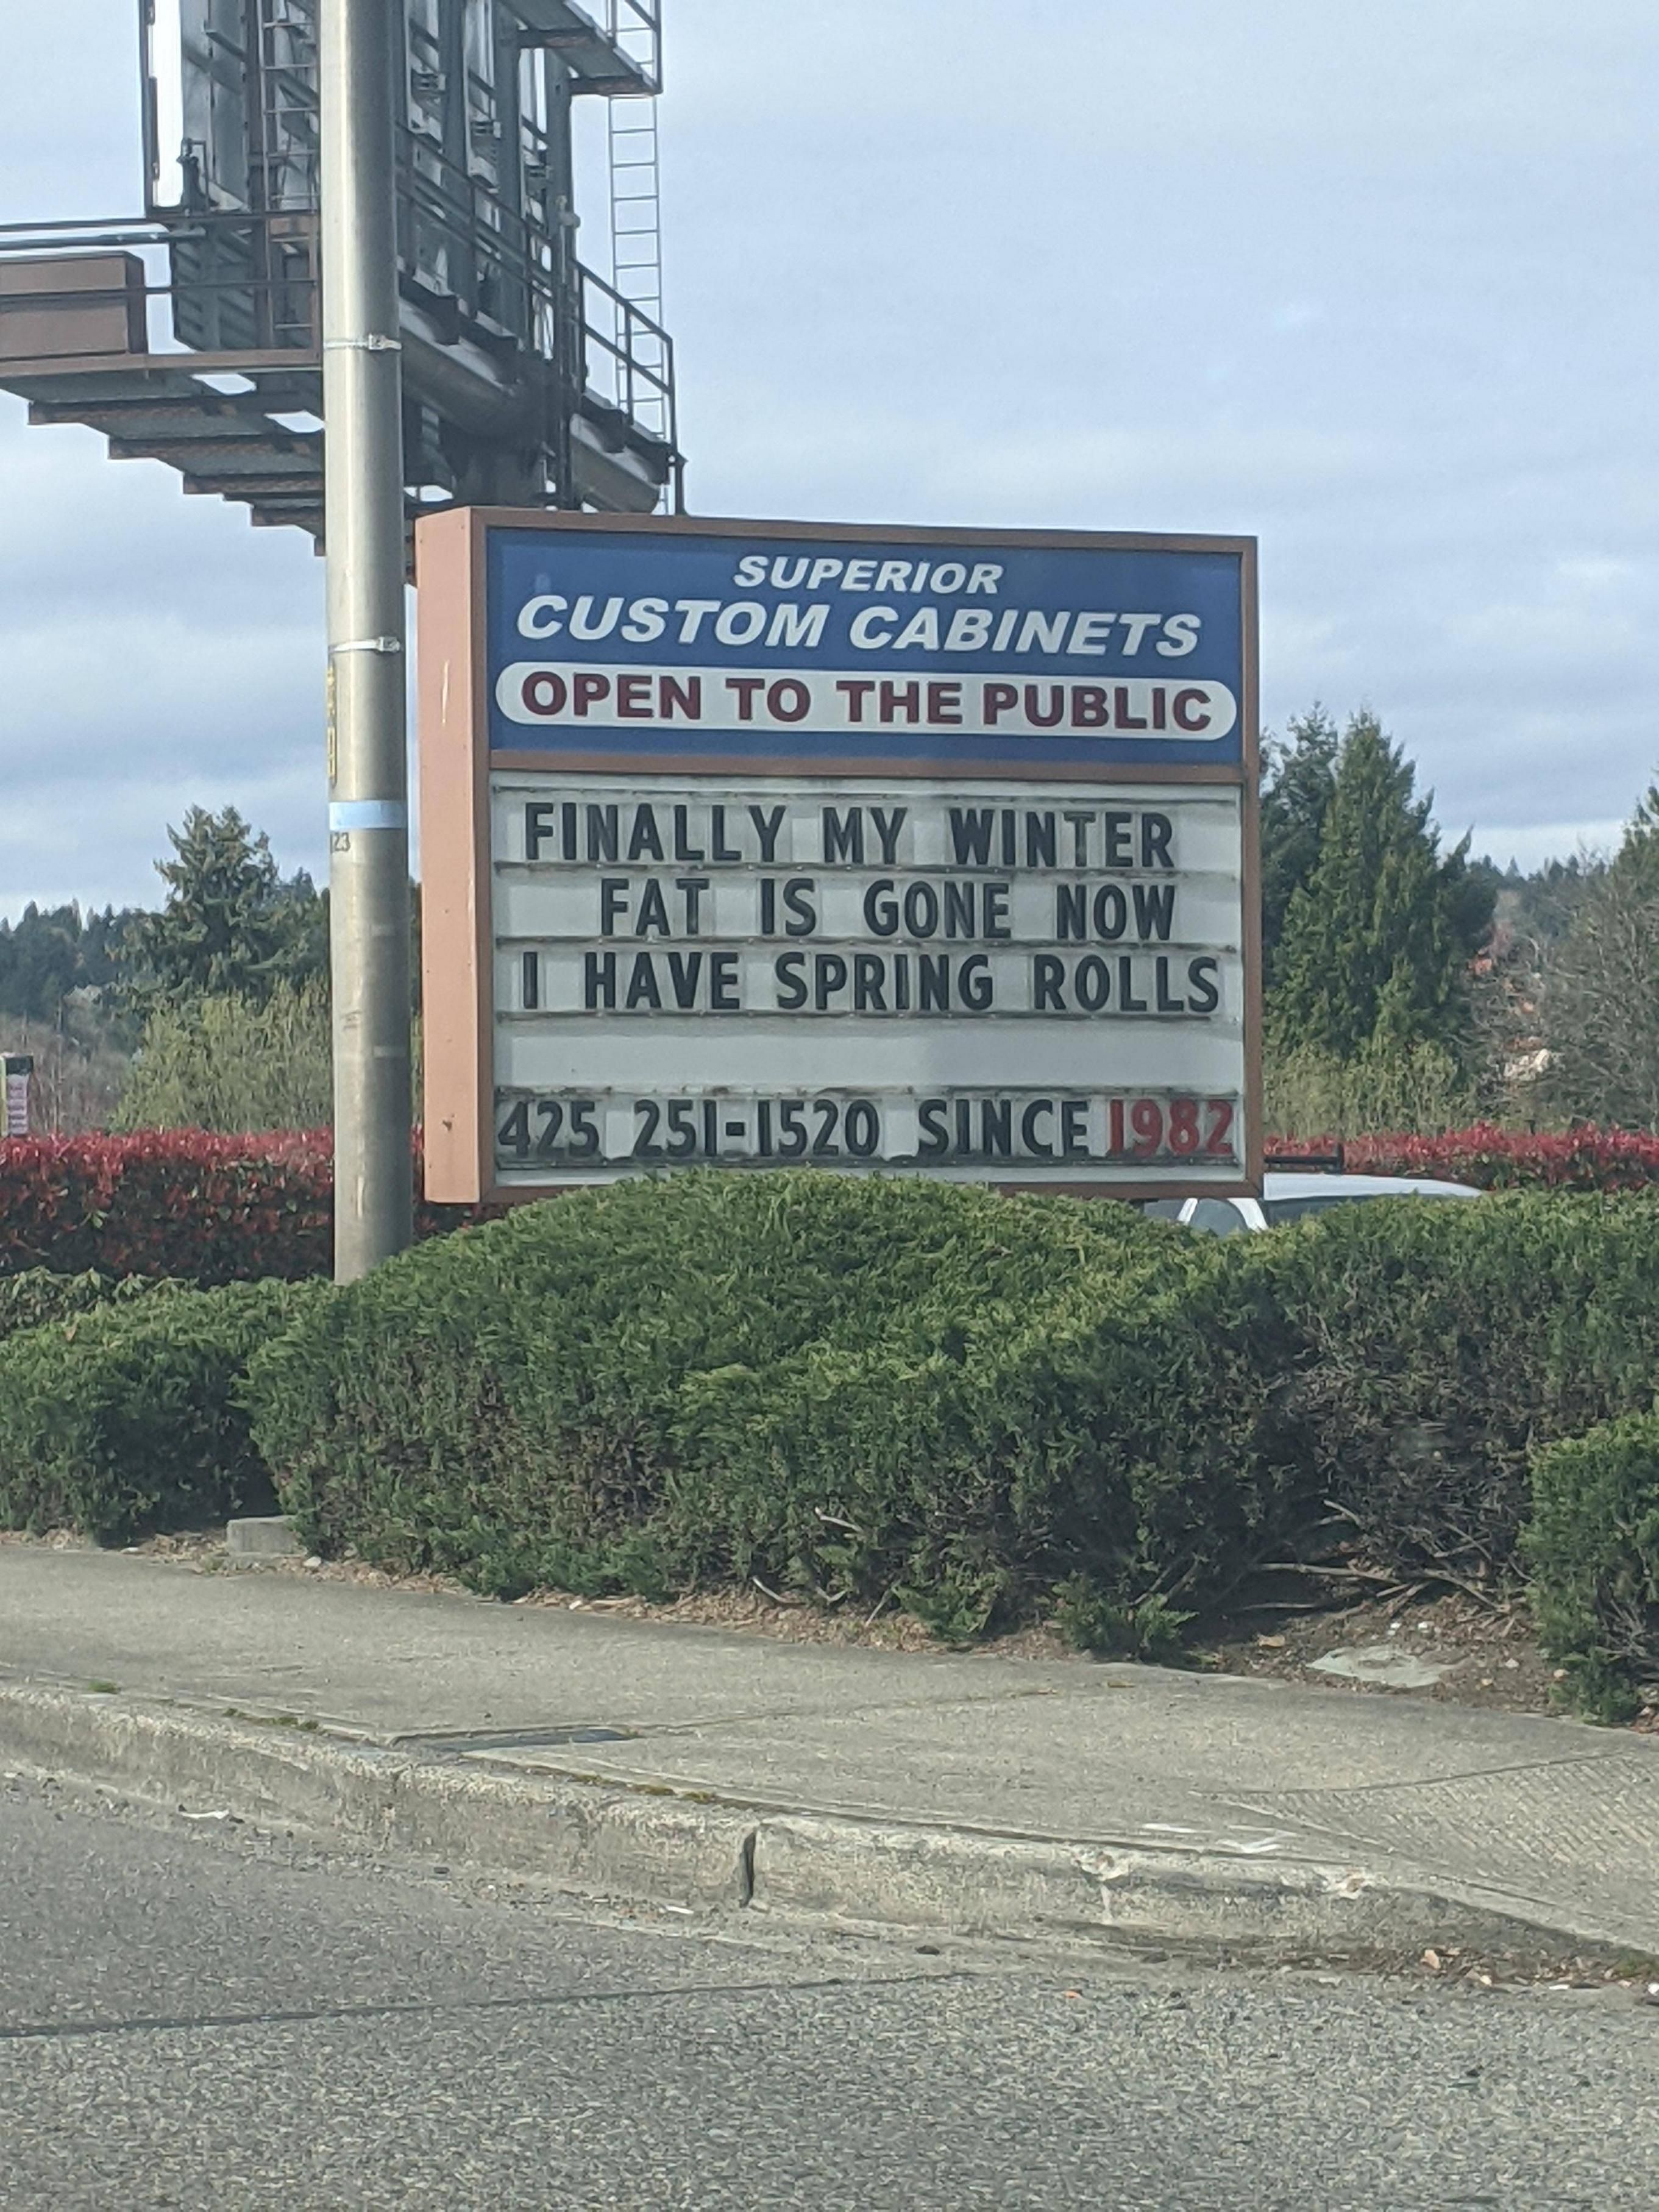 Found this in front of a local store in Renton, WA.